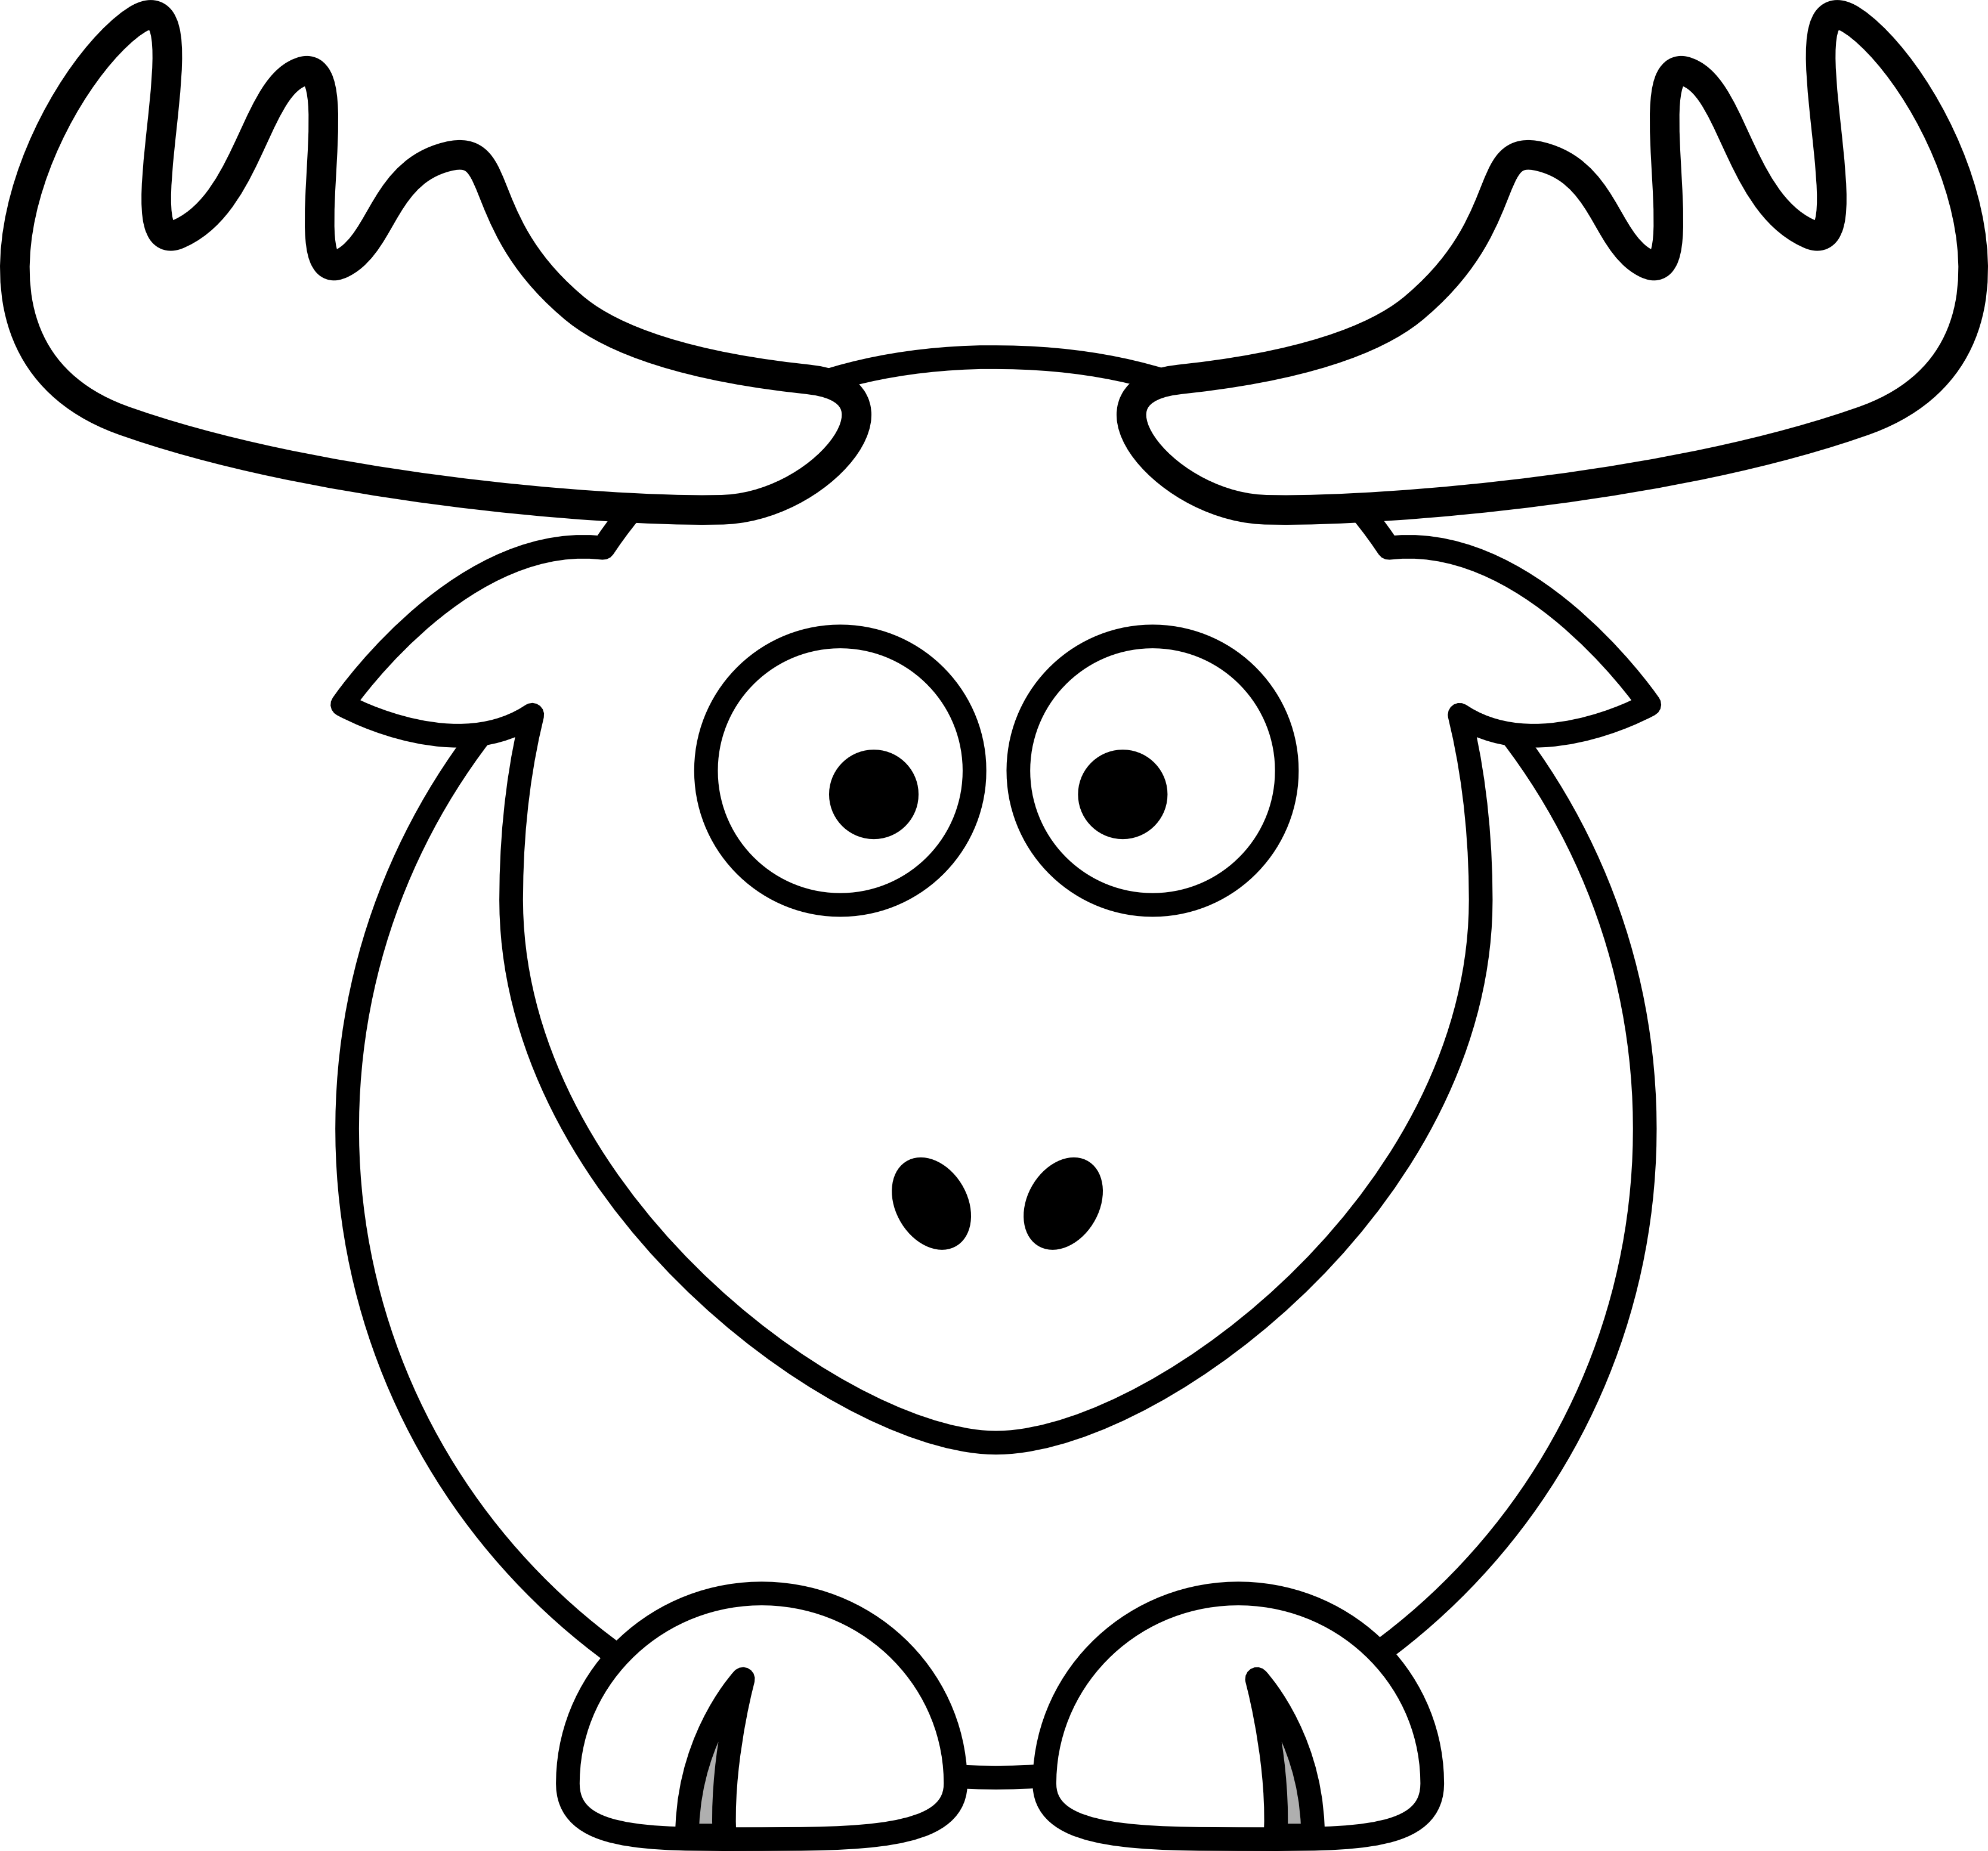 Reindeer Clipart Black And White.